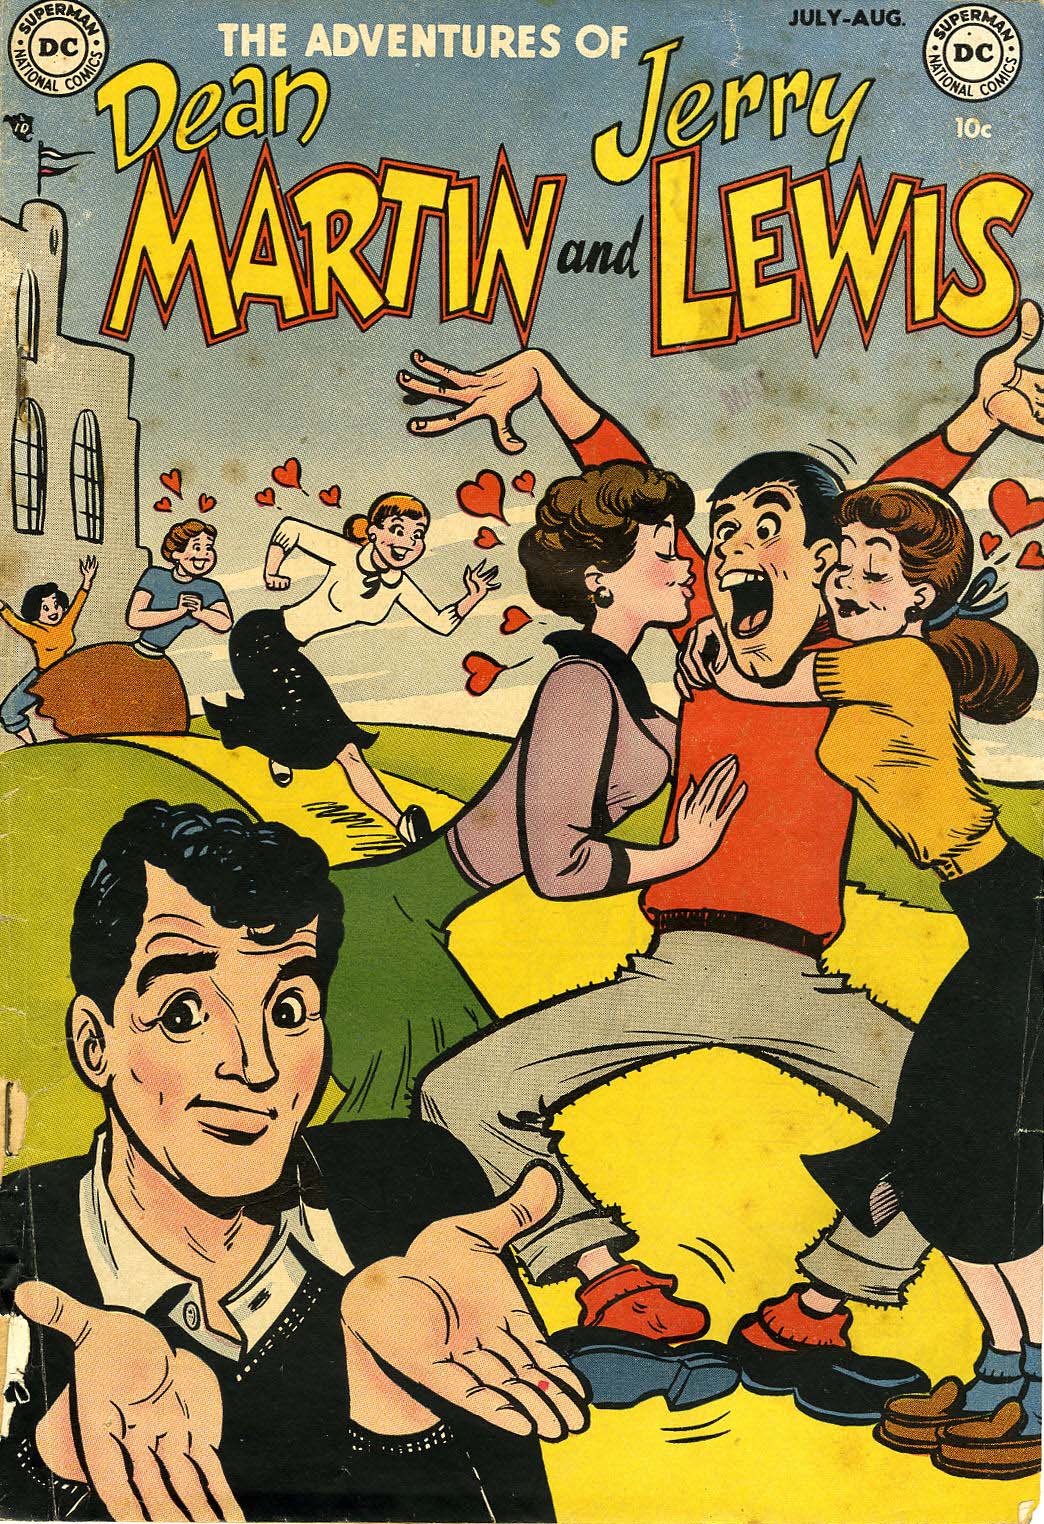 Read online The Adventures of Dean Martin and Jerry Lewis comic -  Issue #1 - 3